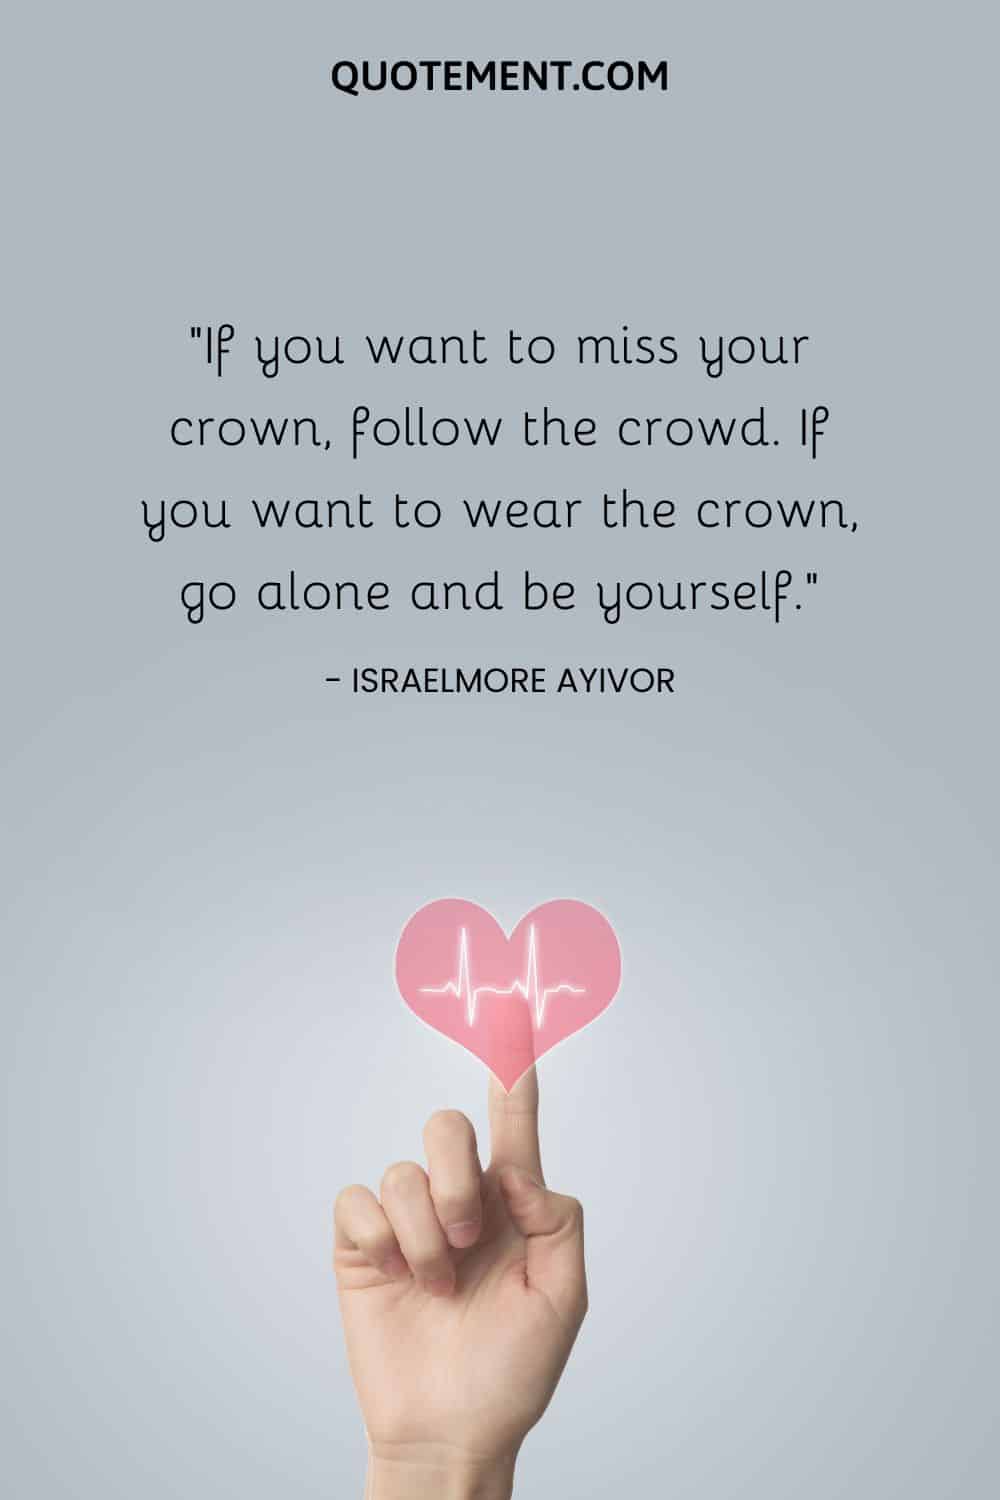 If you want to miss your crown, follow the crowd